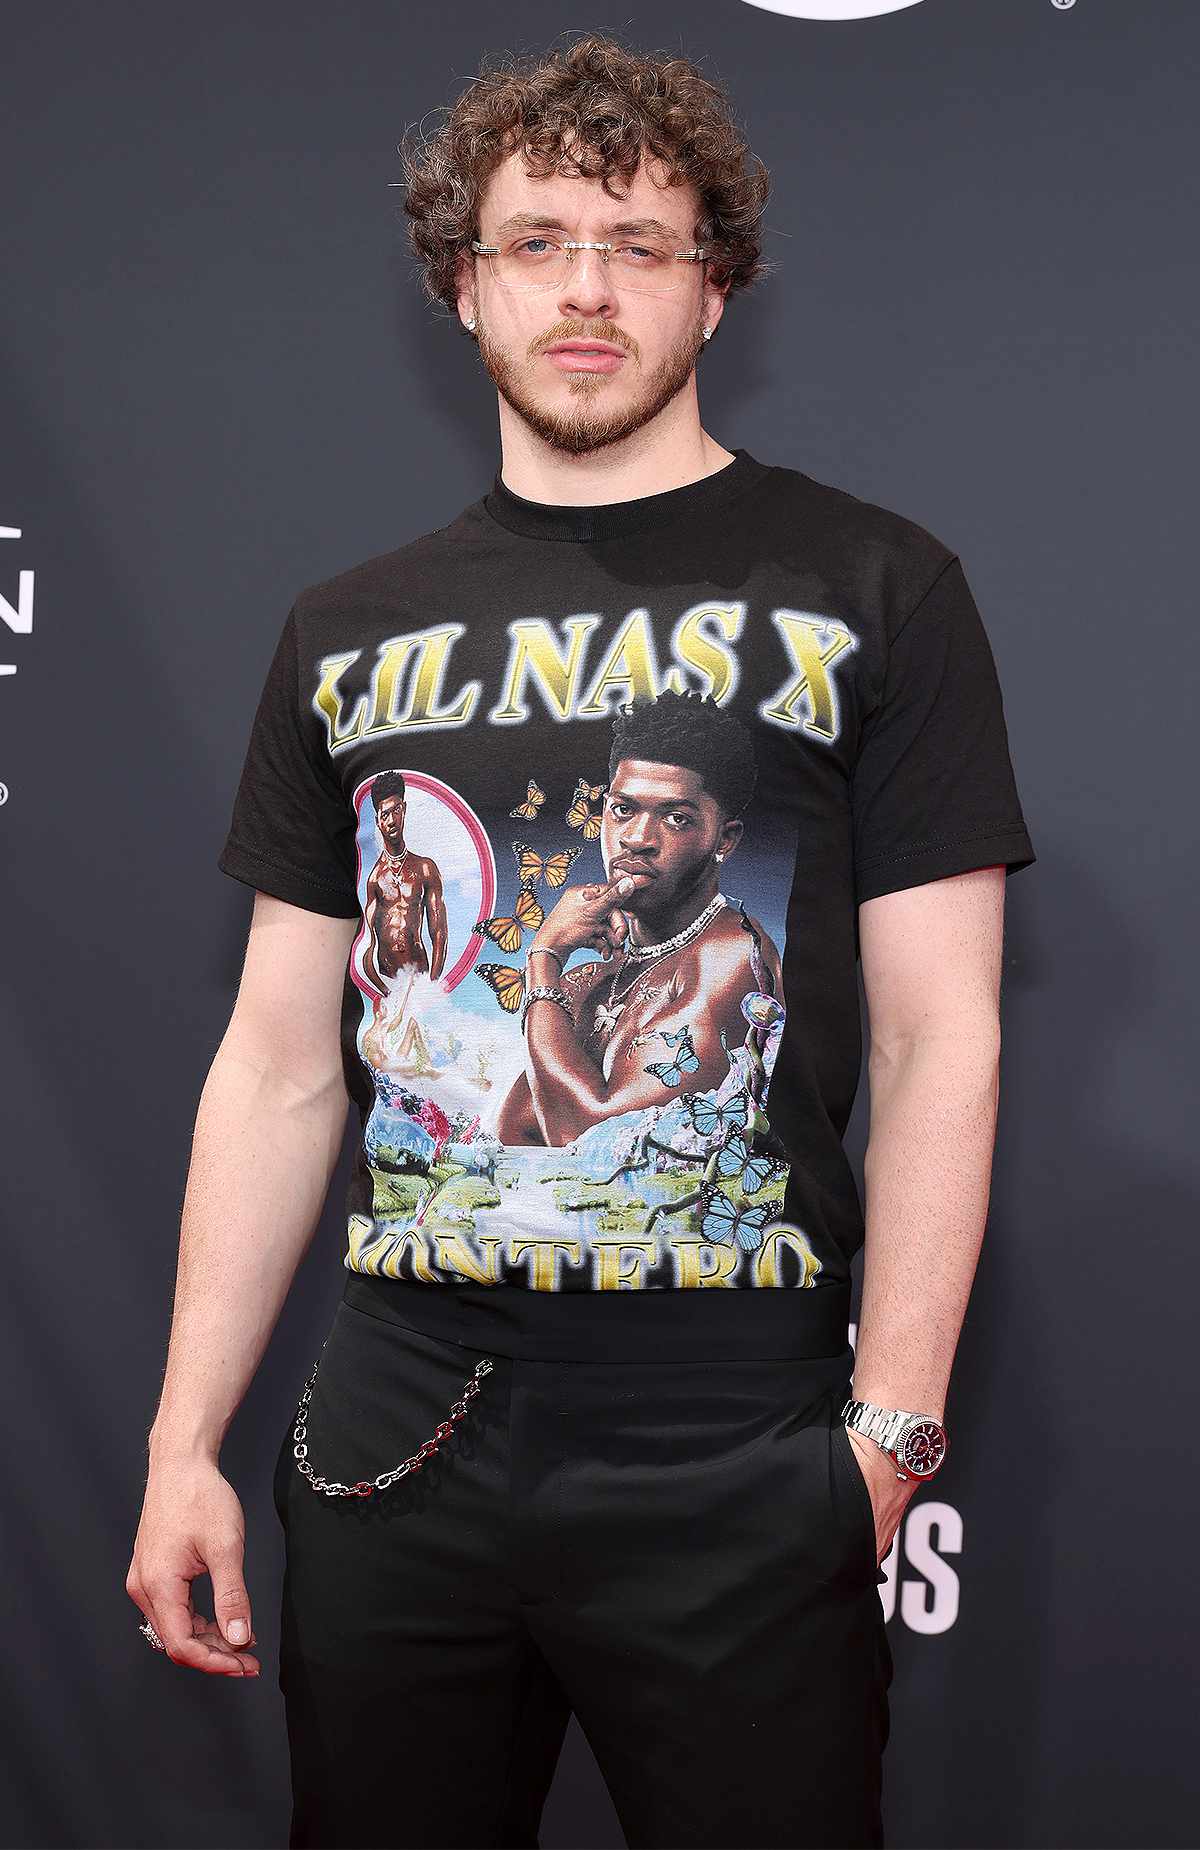 Jack Harlow Wears Lil Nas X T-Shirt to 2022 BET Awards in Support of Singer After Snub